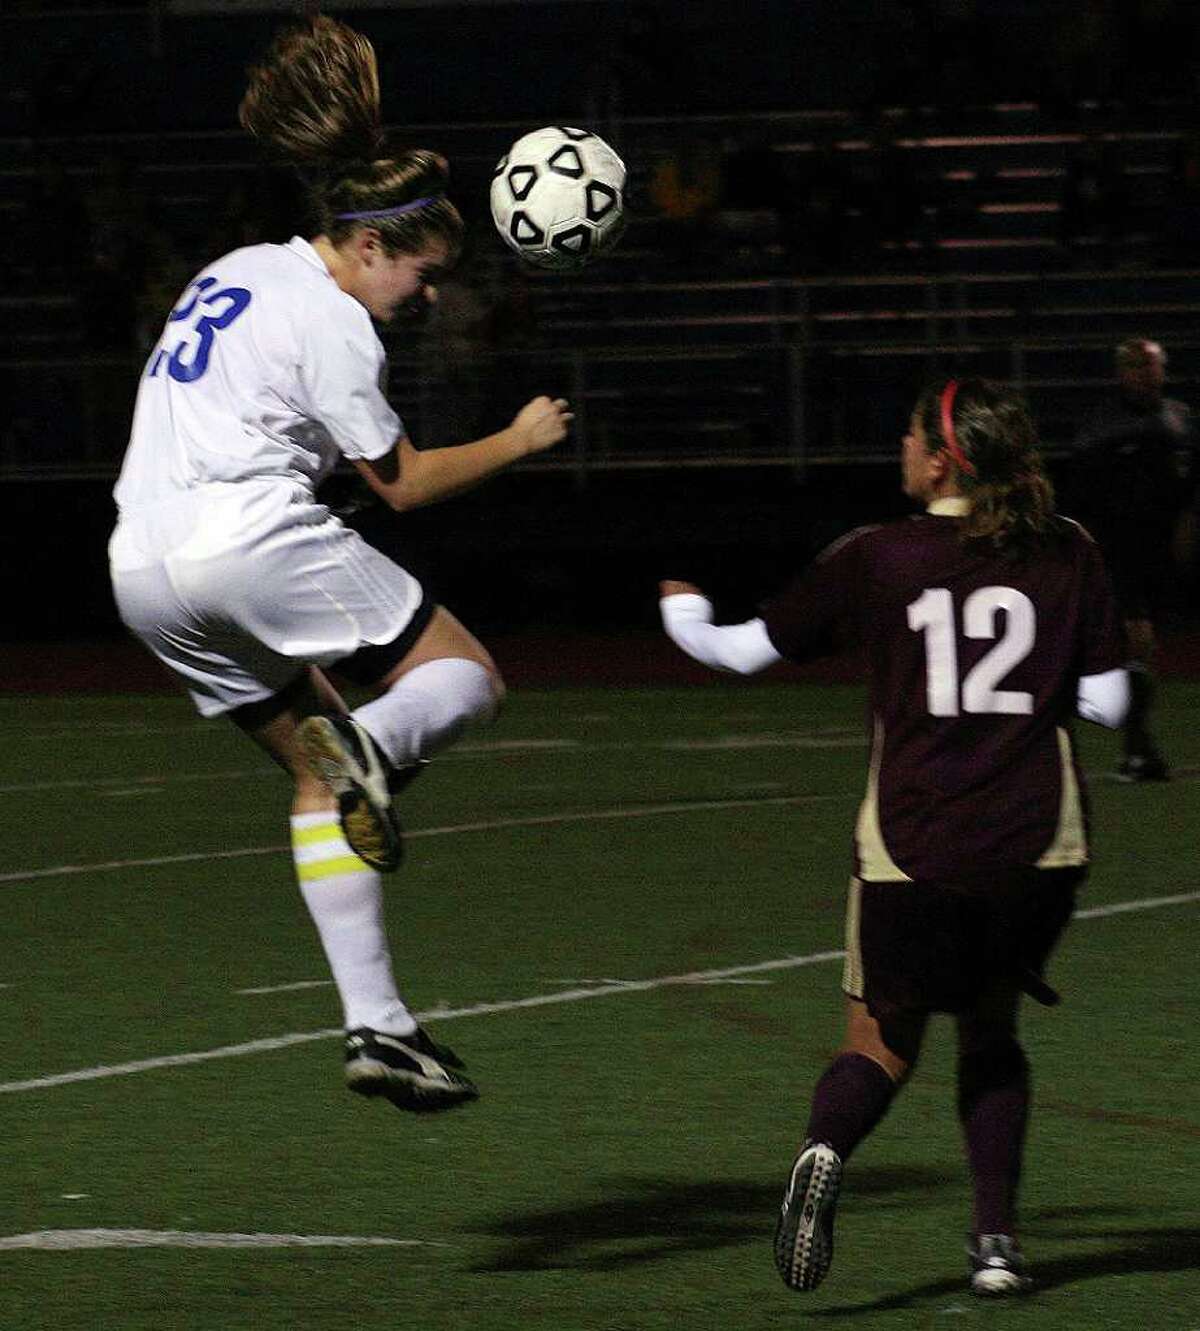 Fairfield Ludlowe midfielder Brooke Mackno (23) heads the ball in front of St. Joseph midfielder Silvia Yanez during a game on Wednesday, Oct. 20, 2010.